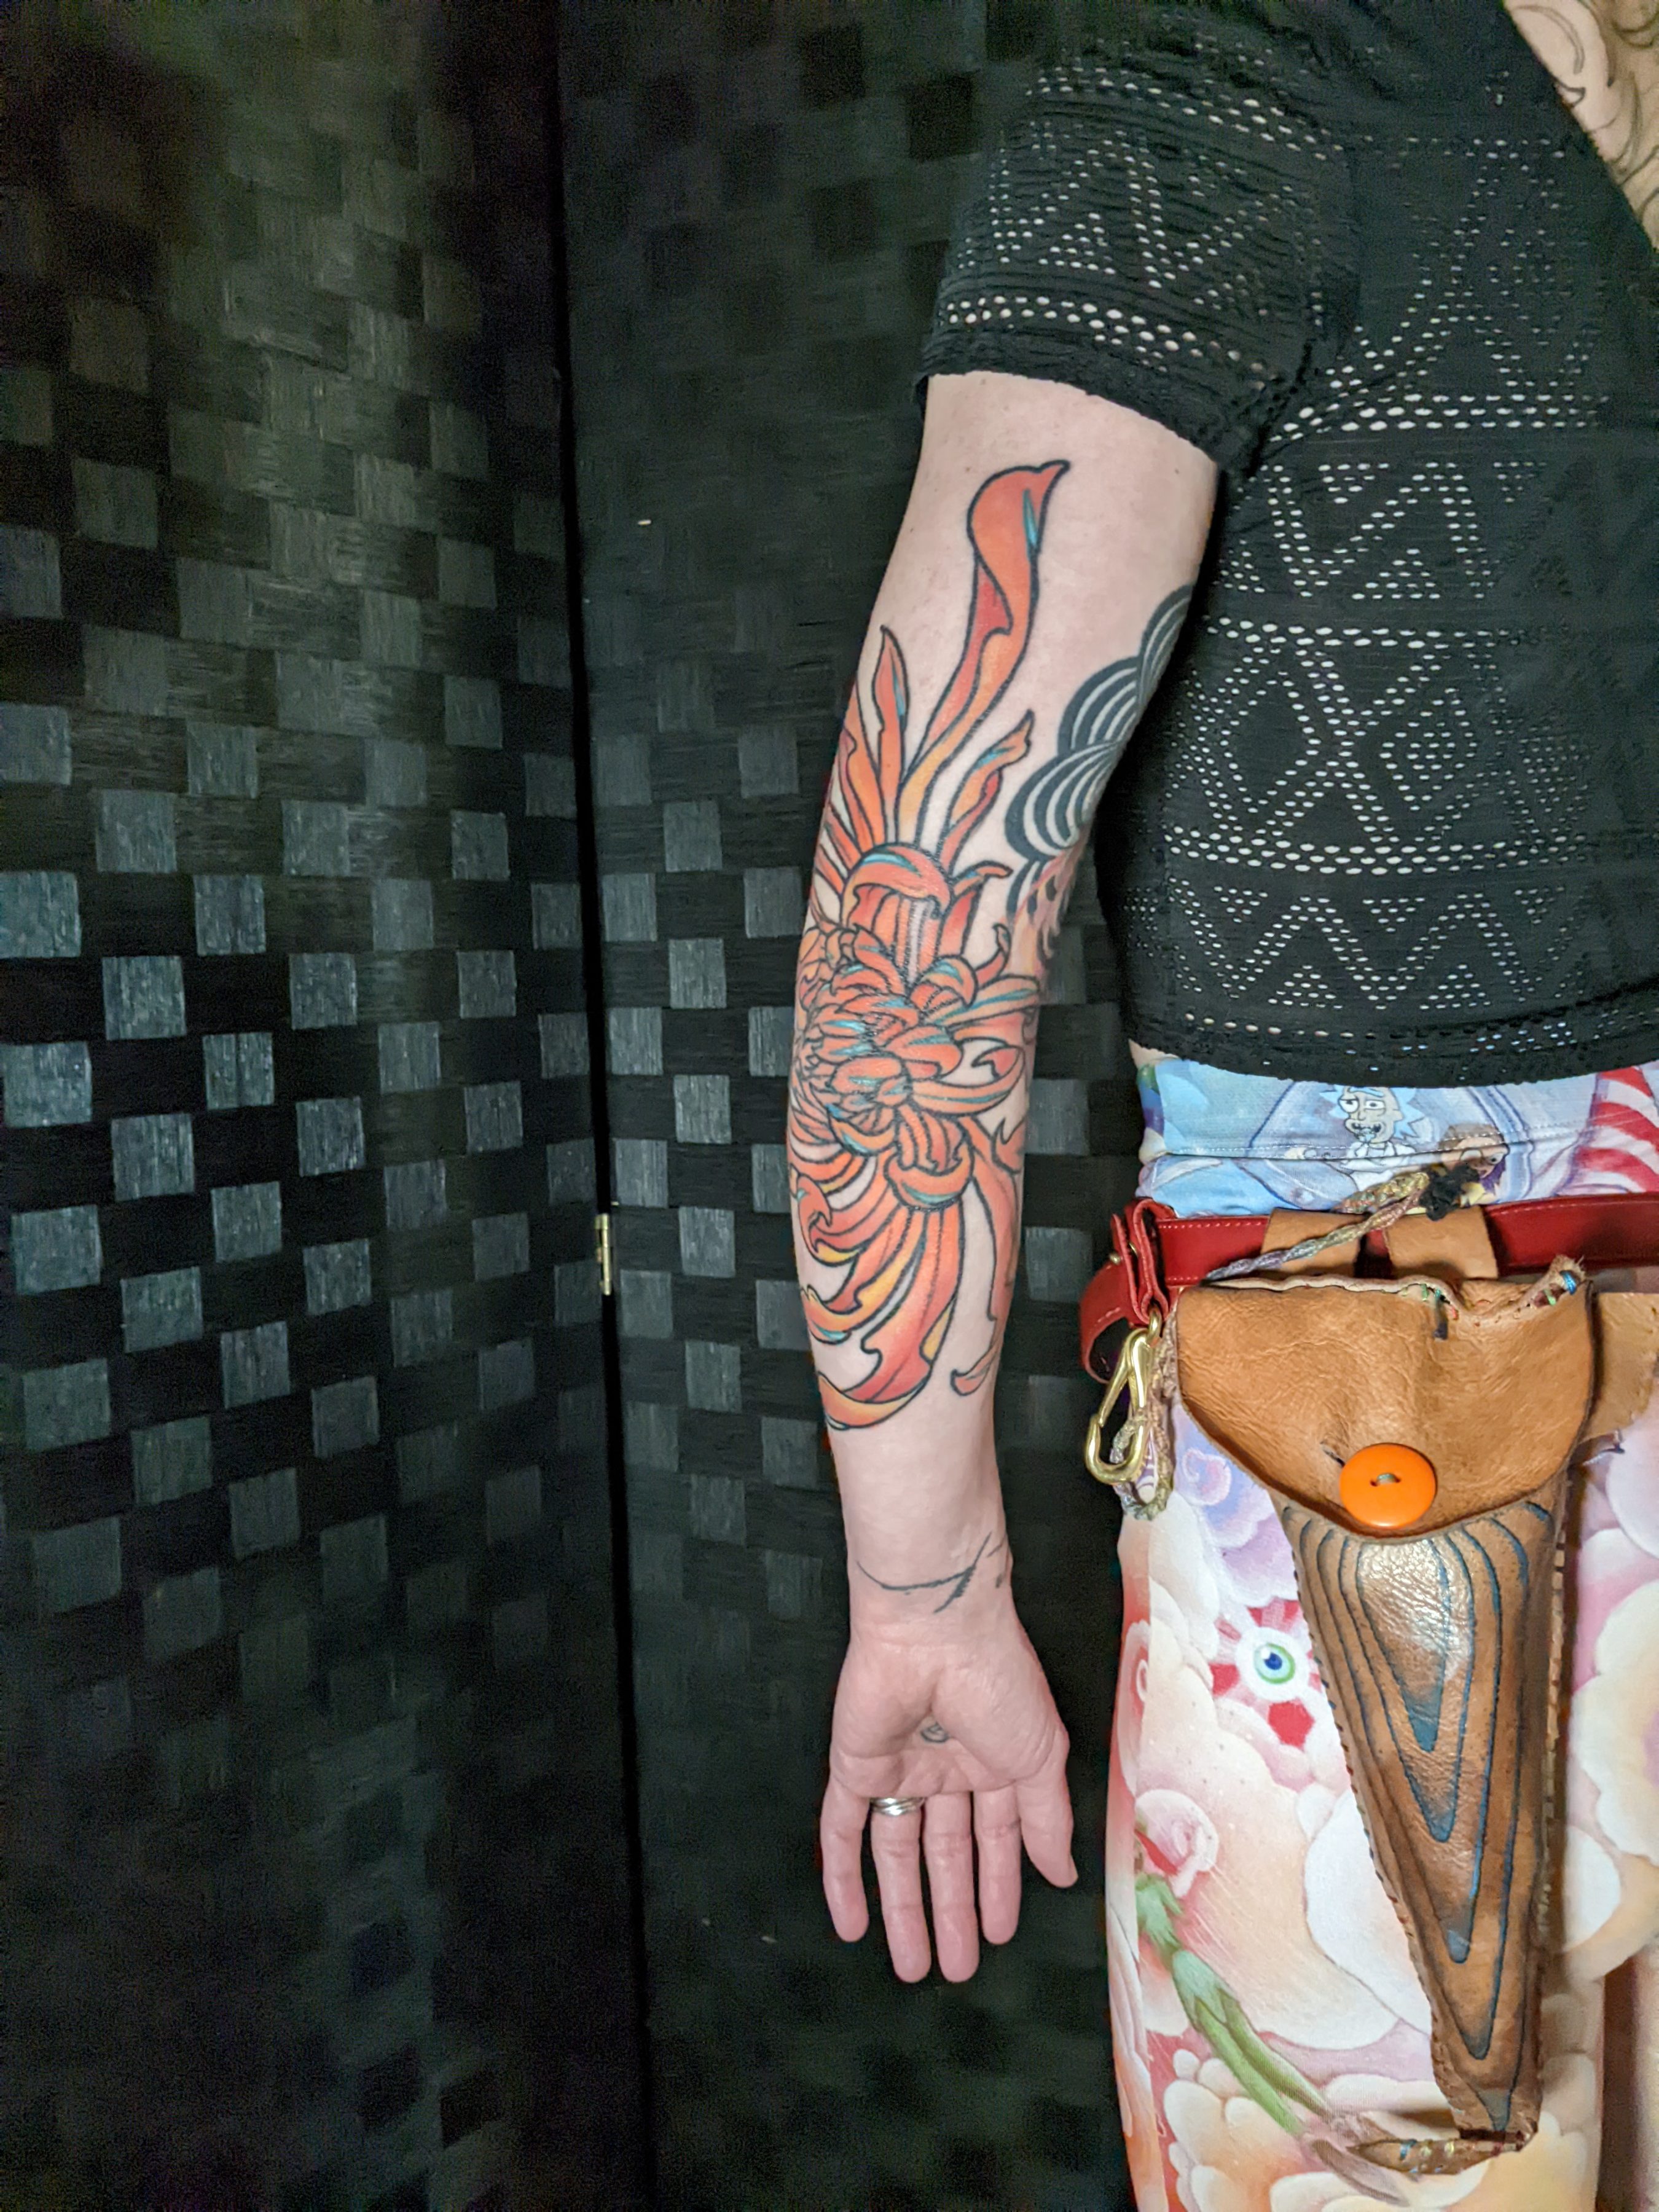 a tattoo of a bright orange, large chrysanthemum on an elbow the person is wearing a matching hip sack, jeans, and a black shirt